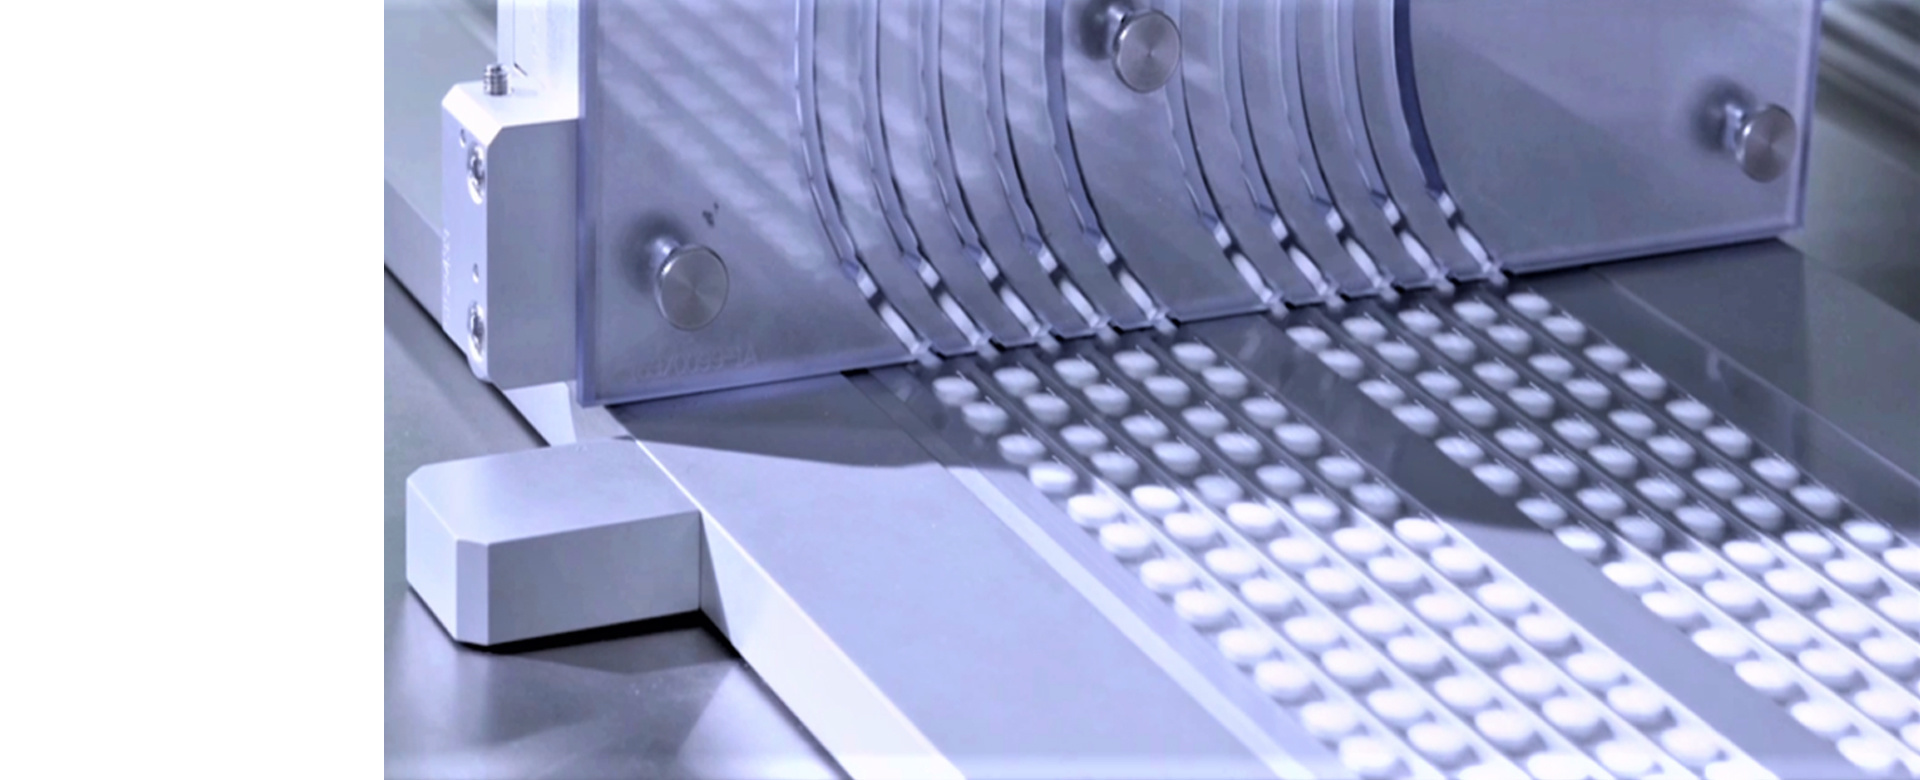 We provide economic packaging machines & services for pharmaceutical applications